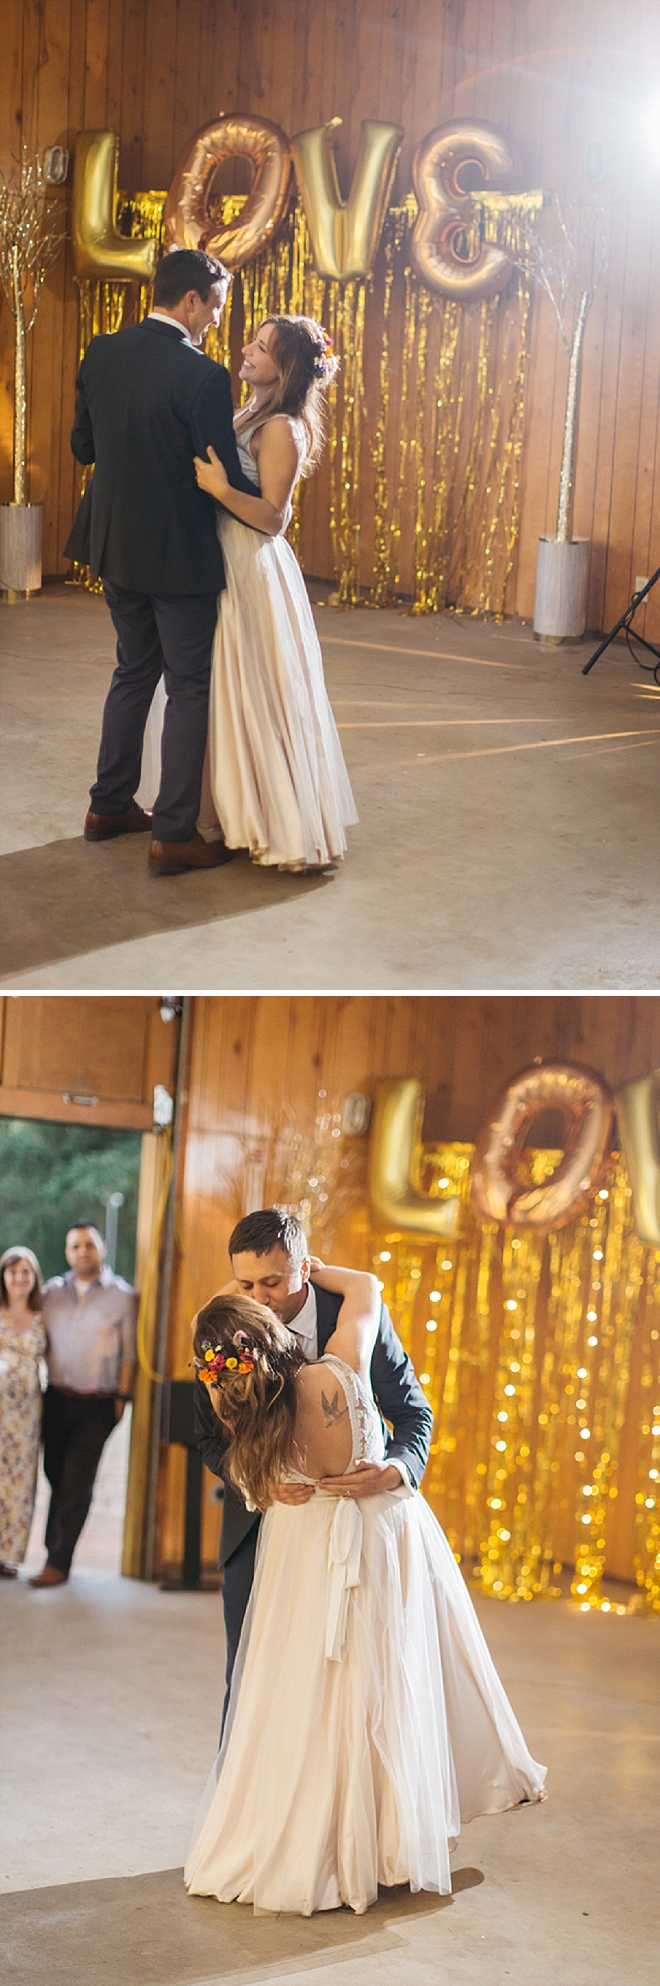 We're loving this first dance as Mr. and Mrs! Check out those love balloons!